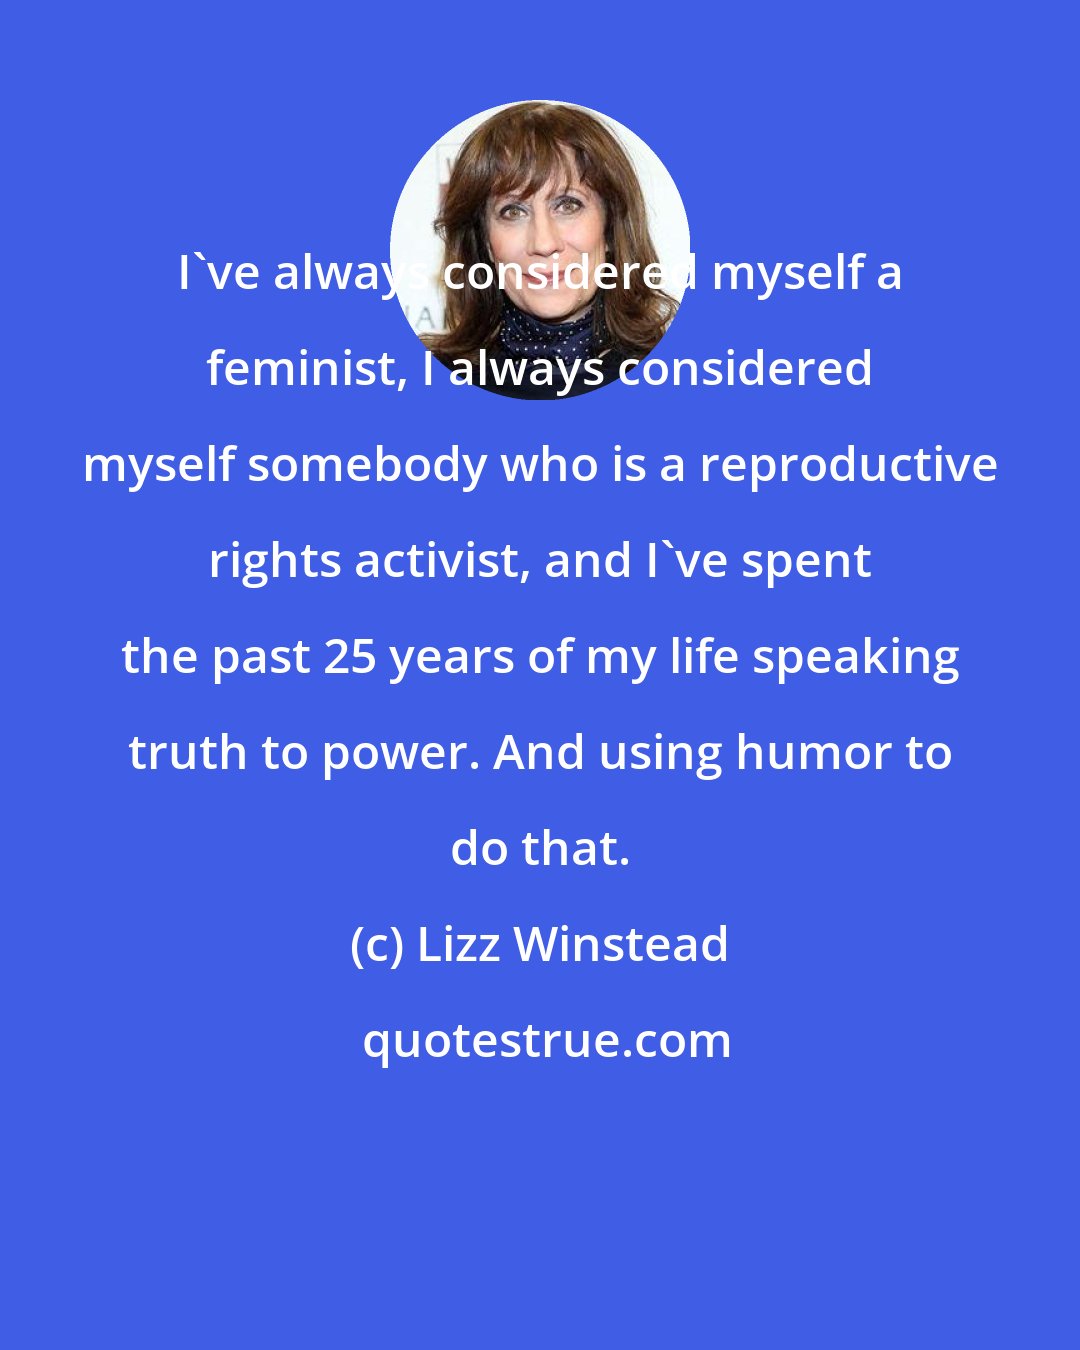 Lizz Winstead: I've always considered myself a feminist, I always considered myself somebody who is a reproductive rights activist, and I've spent the past 25 years of my life speaking truth to power. And using humor to do that.